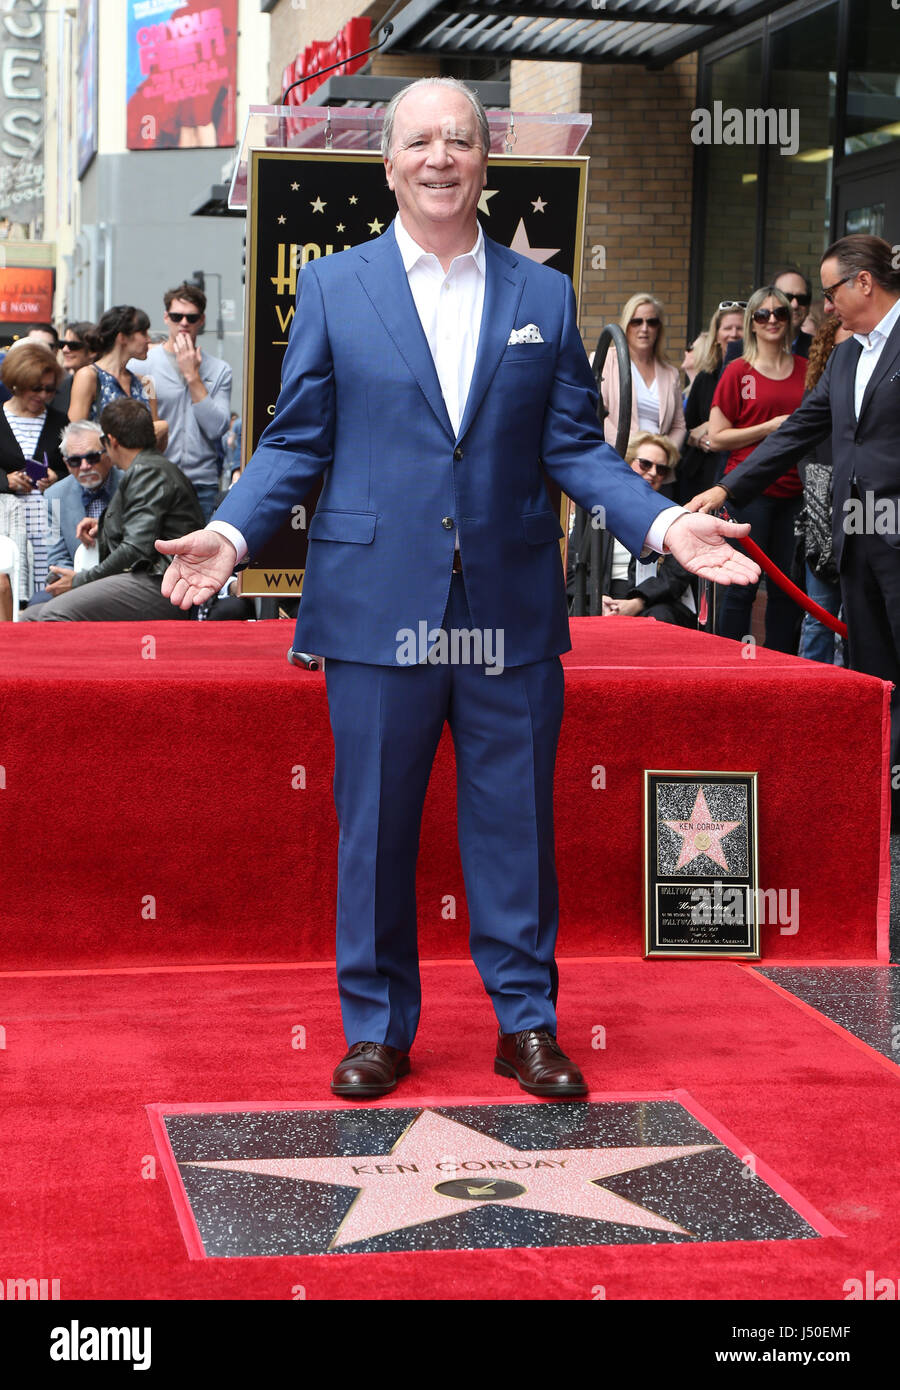 Hollywood, Ca. 15th May, 2017. Ken Corday, At Ken Corday Honored With Star On The Hollywood Walk Of Fame At On The Hollywood Walk Of Fame In California on May 15, 2017. Credit: Fs/Media Punch/Alamy Live News Stock Photo